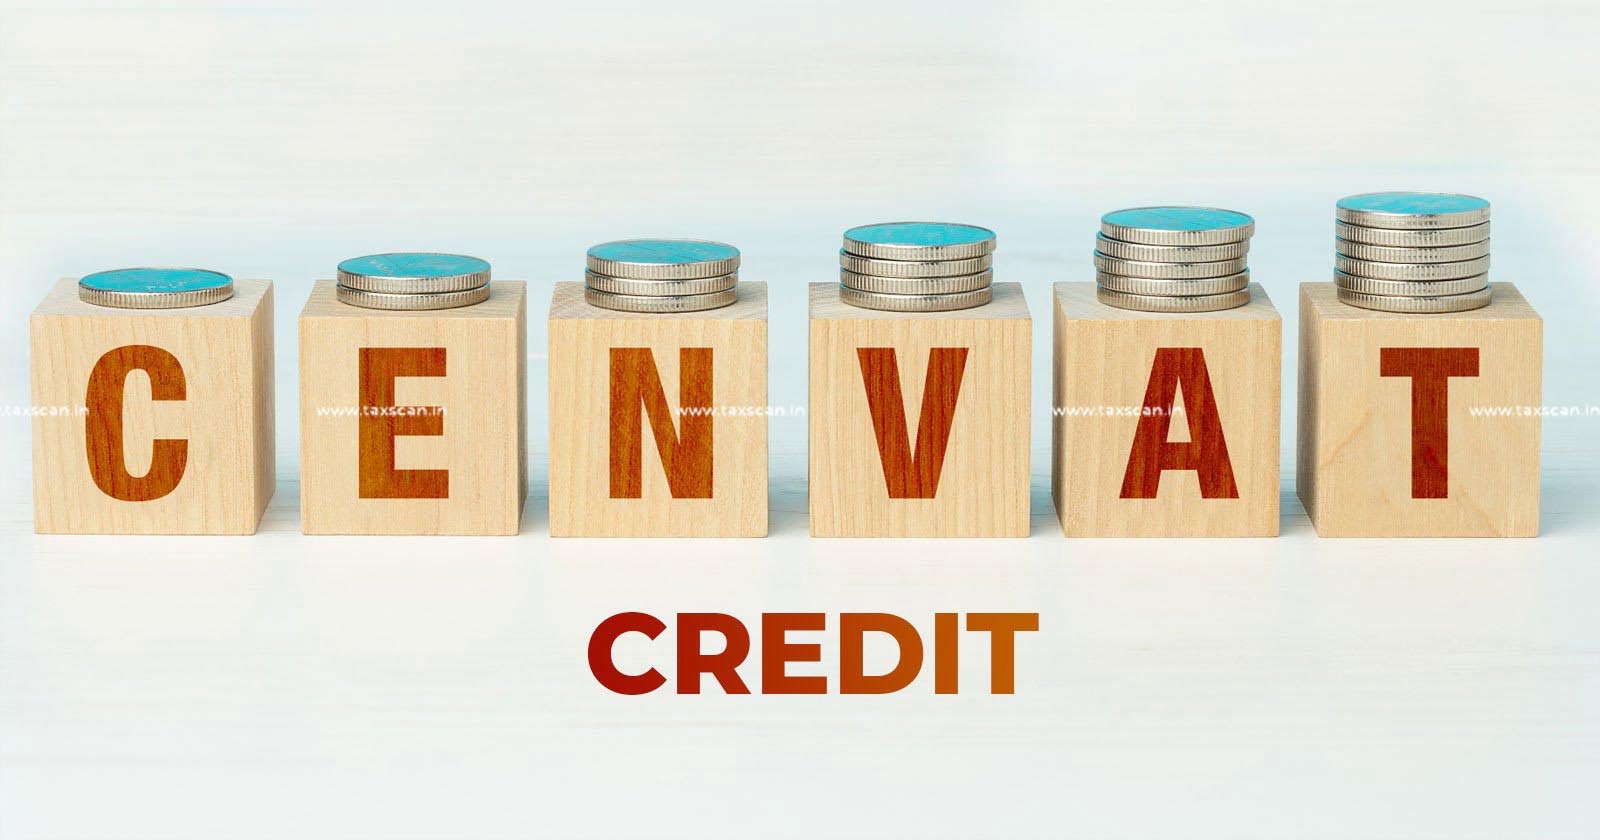 Claim of Cenvat Credit cannot - rejected without considering Evidence - CESTAT - TAXSCAN